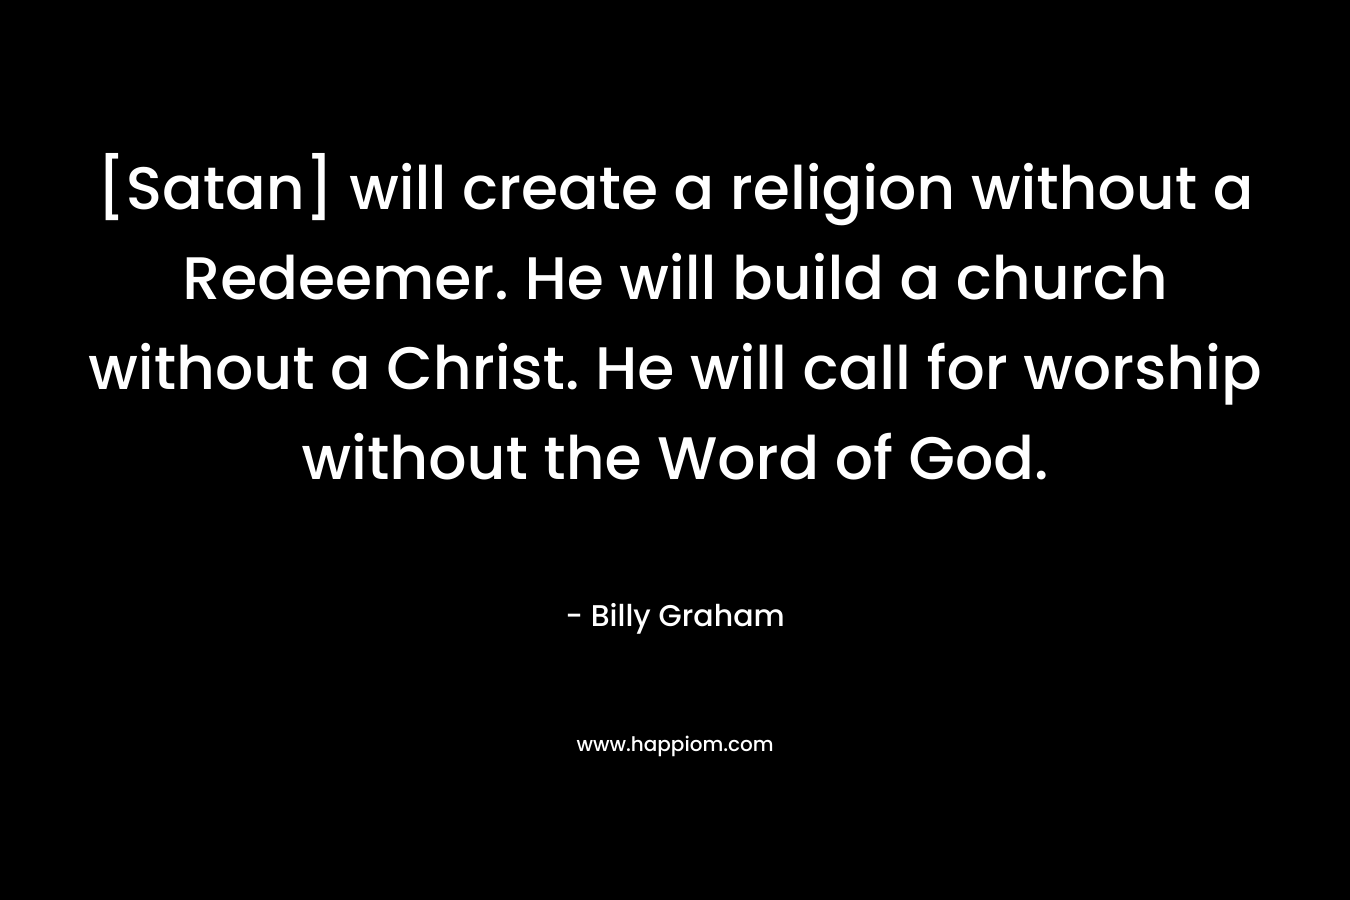 [Satan] will create a religion without a Redeemer. He will build a church without a Christ. He will call for worship without the Word of God.